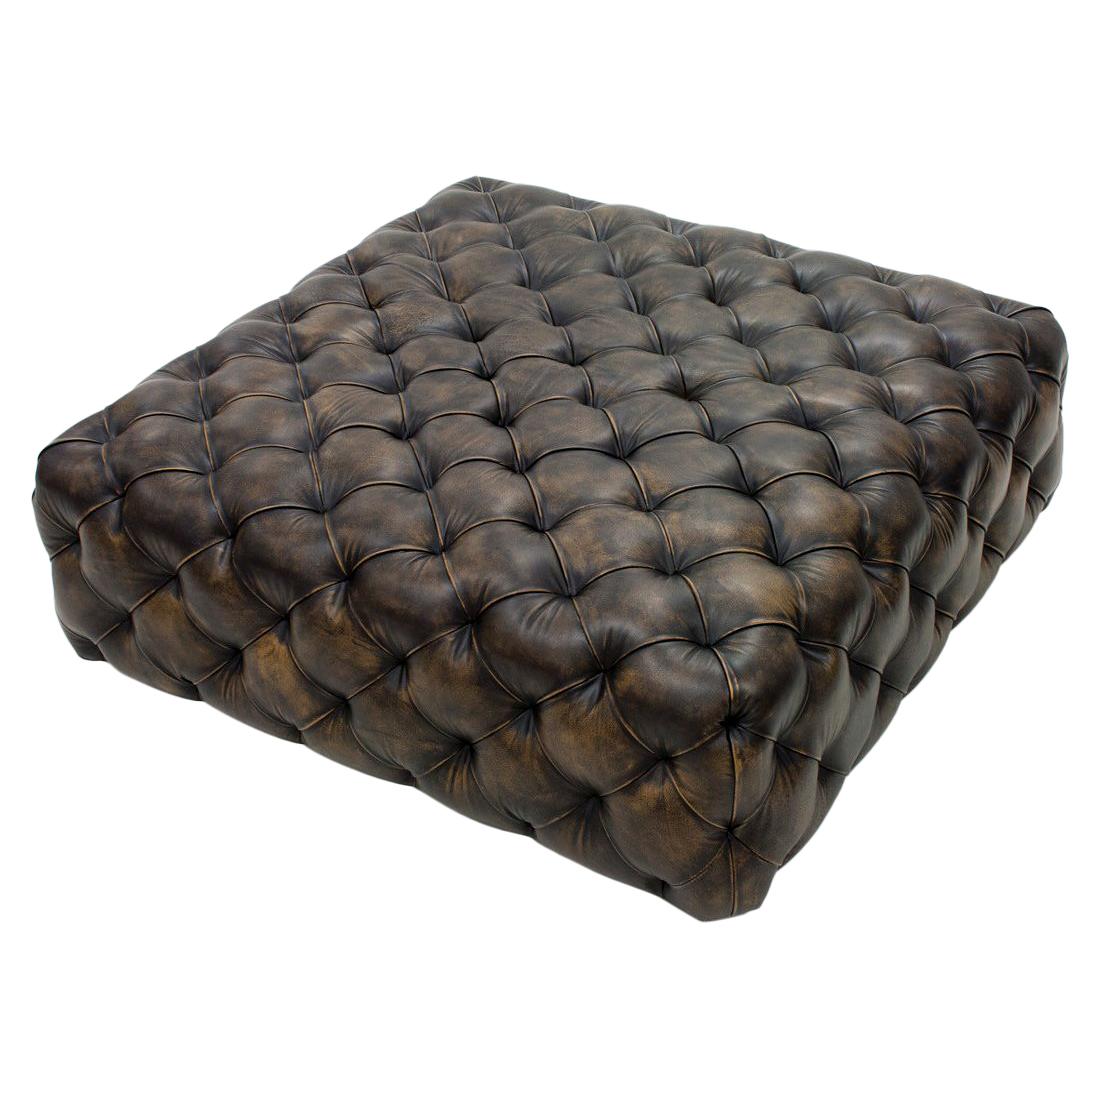 Browny Leather Ottoman Not Button For Sale